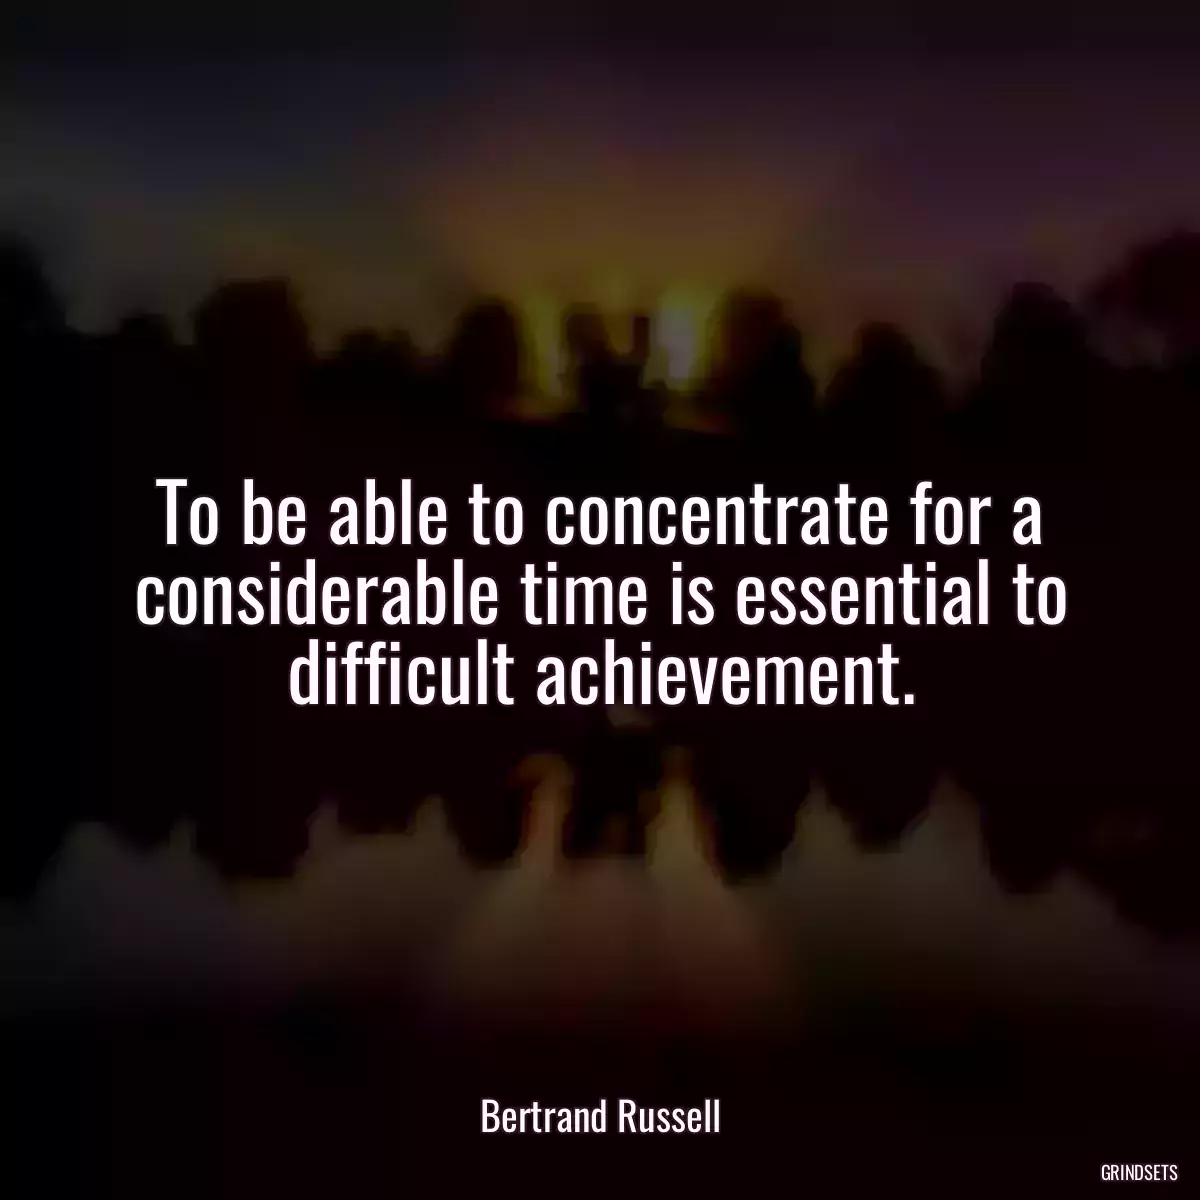 To be able to concentrate for a considerable time is essential to difficult achievement.